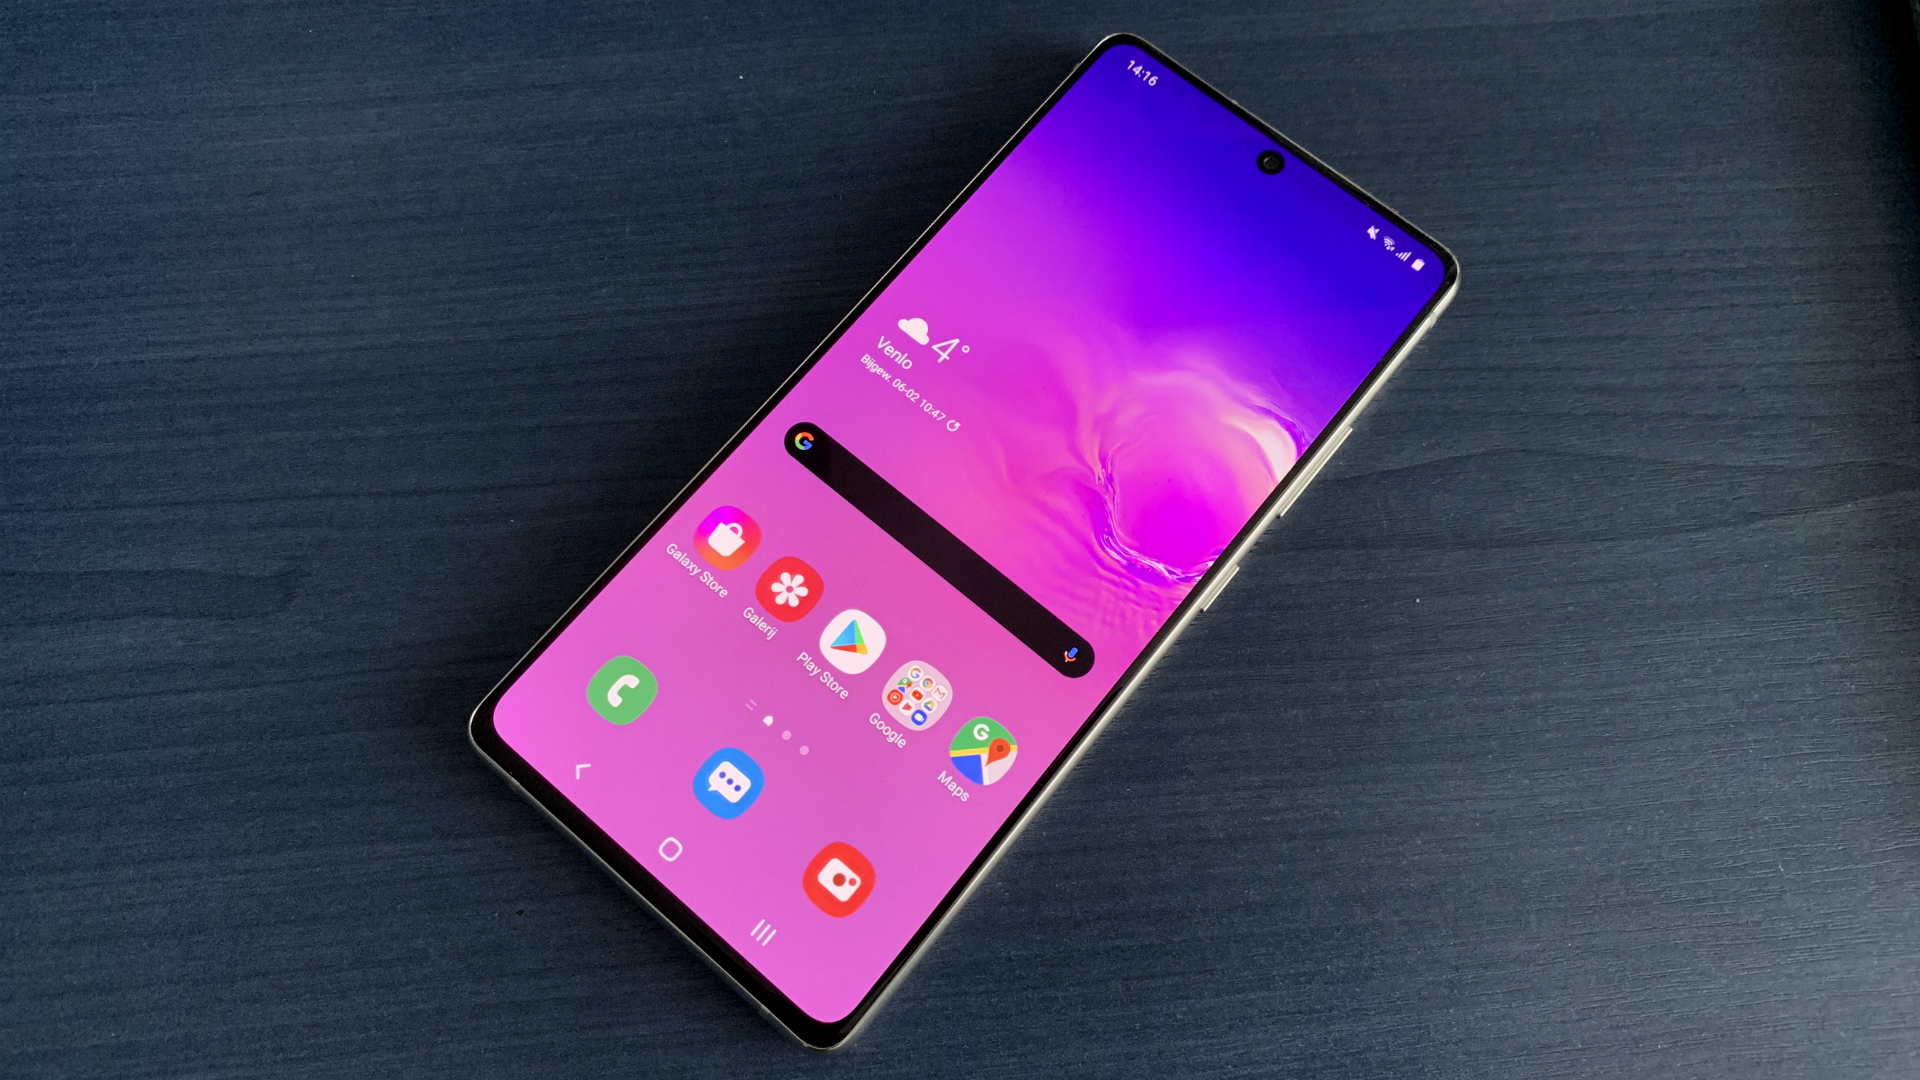 Not a typo, the Samsung Galaxy S10 Lite is on sale in US for $650